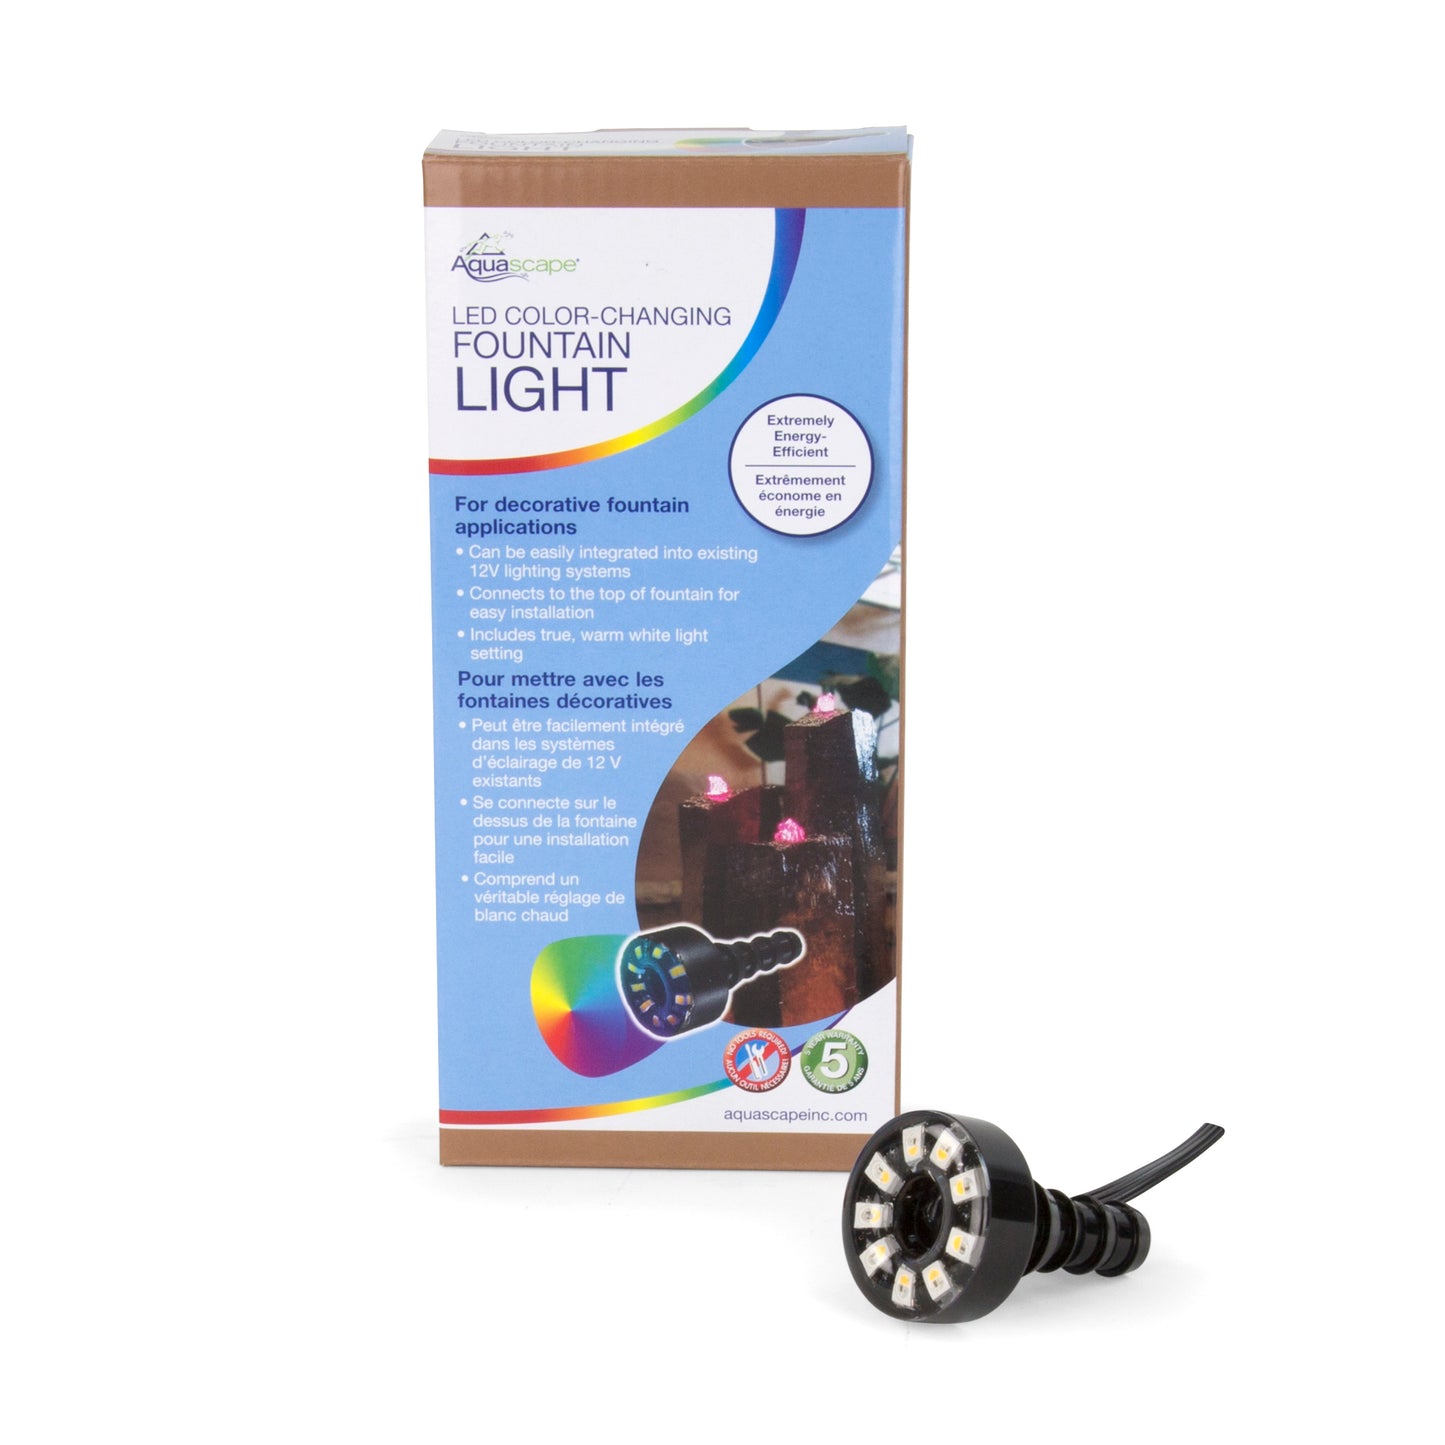 LED Color-Changing Fountain Light